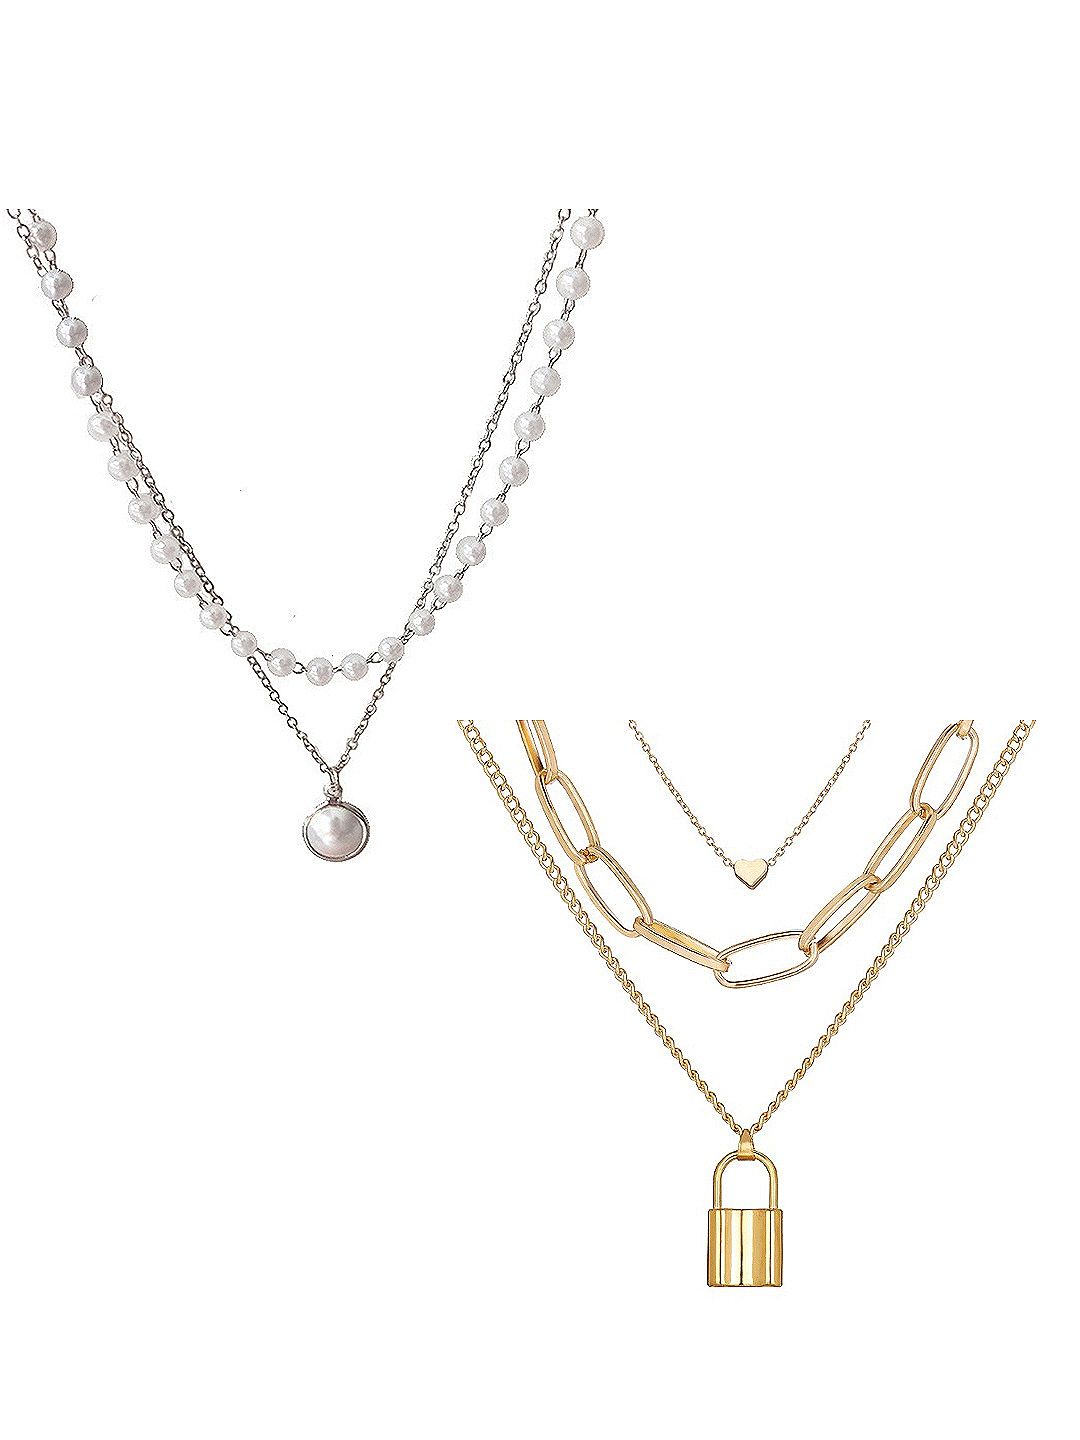 Vembley Set  Of 2 Silver-Toned & Gold-Toned Silver-Plated Layered Necklace Price in India